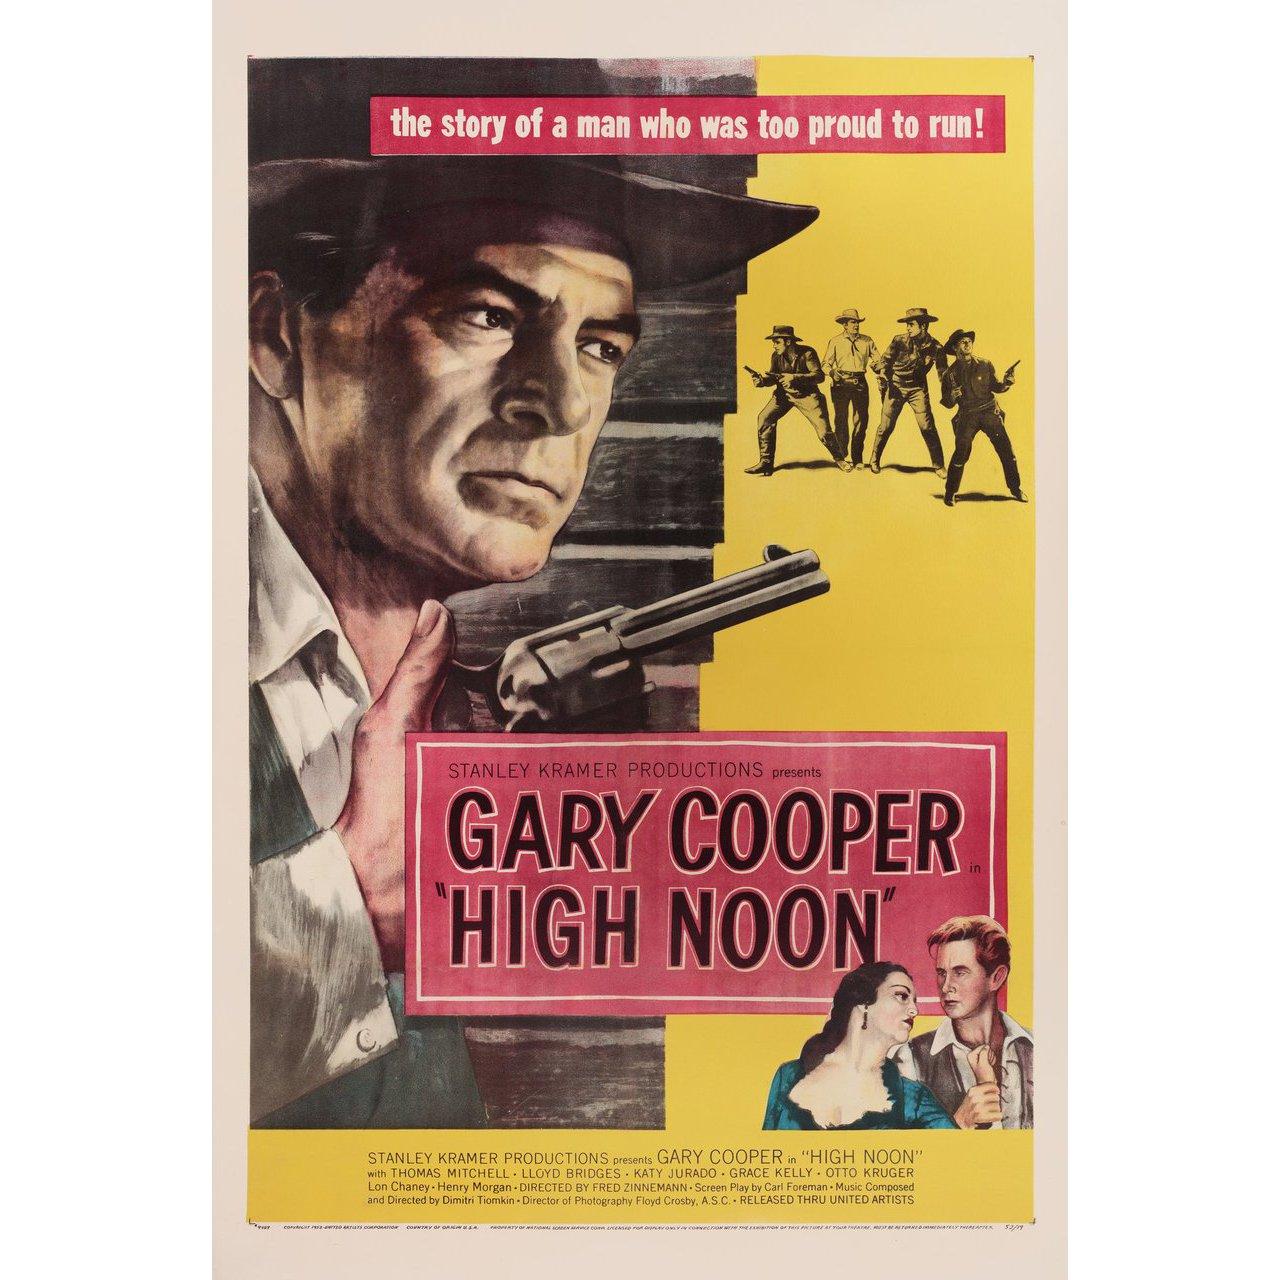 Original 1952 U.S. one sheet poster for the film High Noon directed by Fred Zinnemann with Gary Cooper / Thomas Mitchell / Lloyd Bridges / Katy Jurado. Fine condition, linen-backed. This poster has been professionally linen-backed. Please note: the